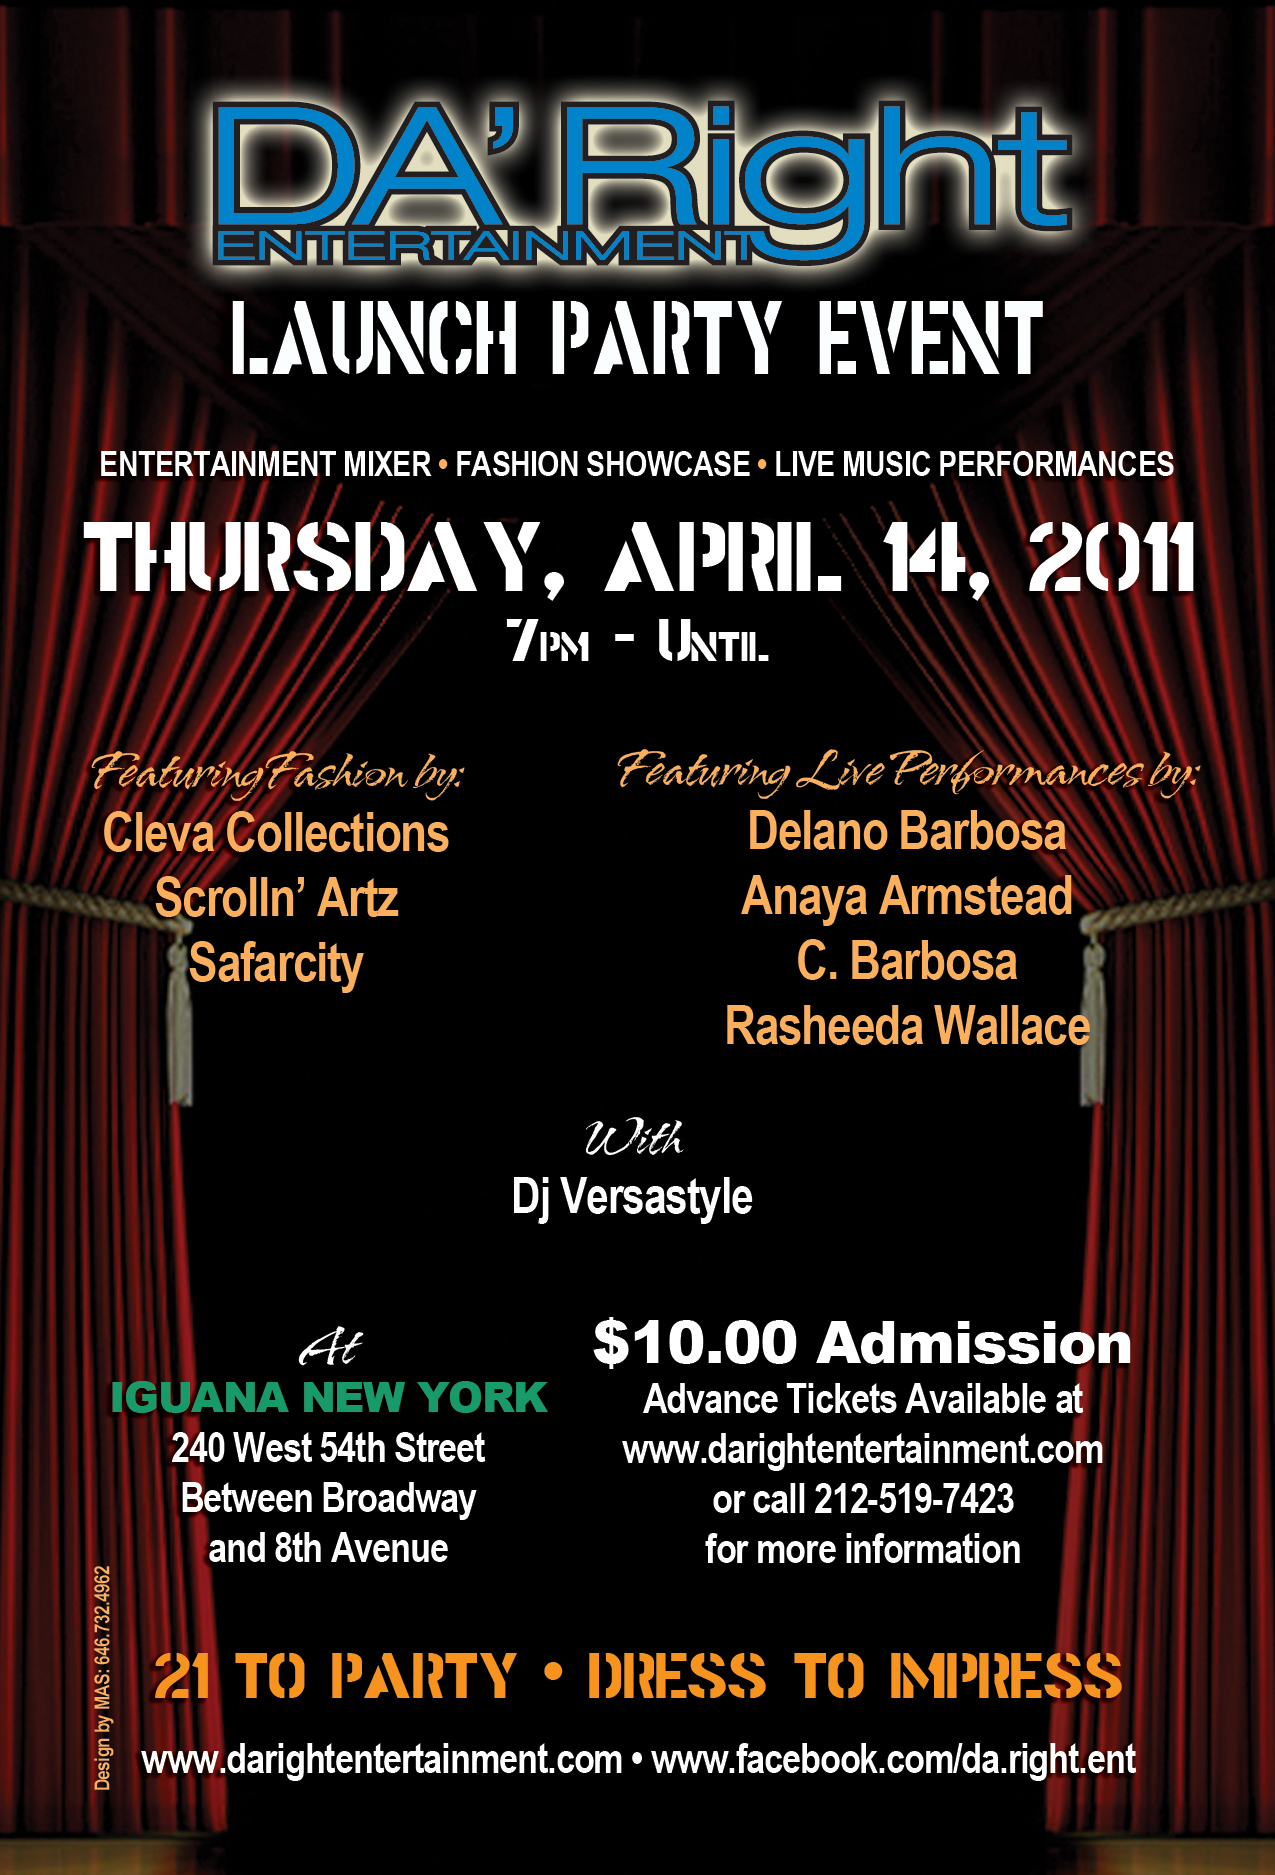 DA' Right Entertainment's Inaugural Launch Party Event Will Be Held on